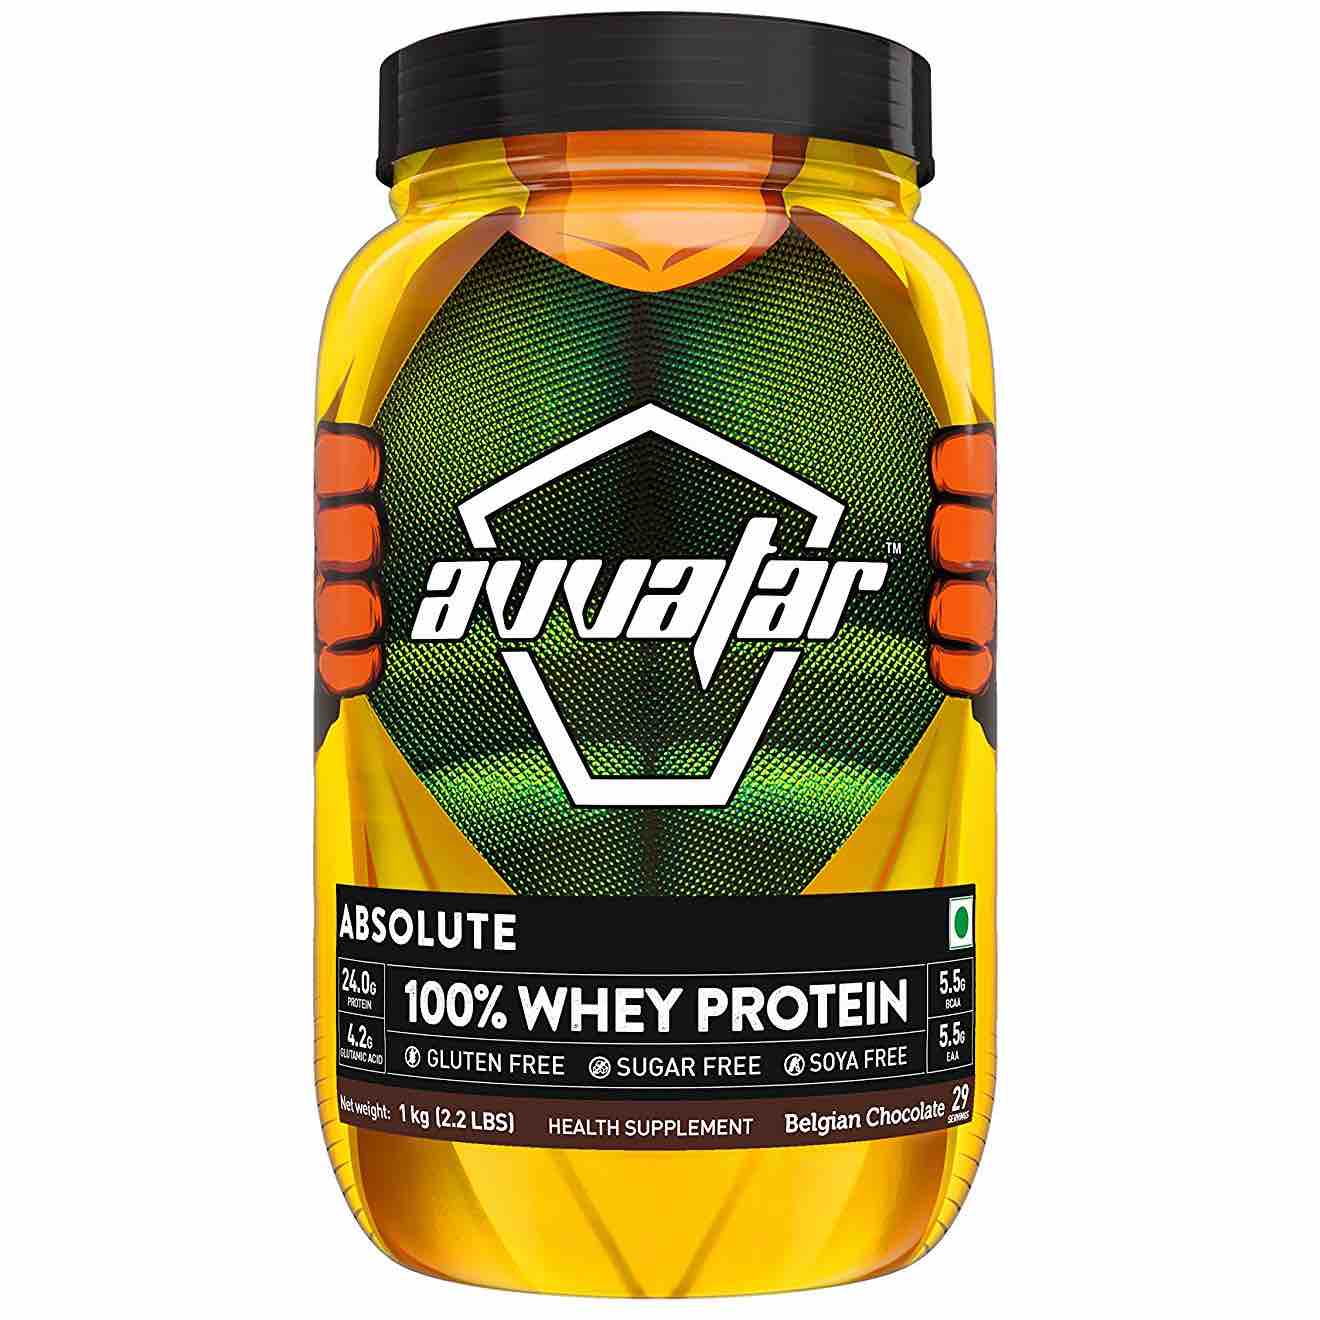 Height 100 absolute. Ё Whey Protein. Whey Mocha. Absolute 100. Absolute men Whey 100% Premium.